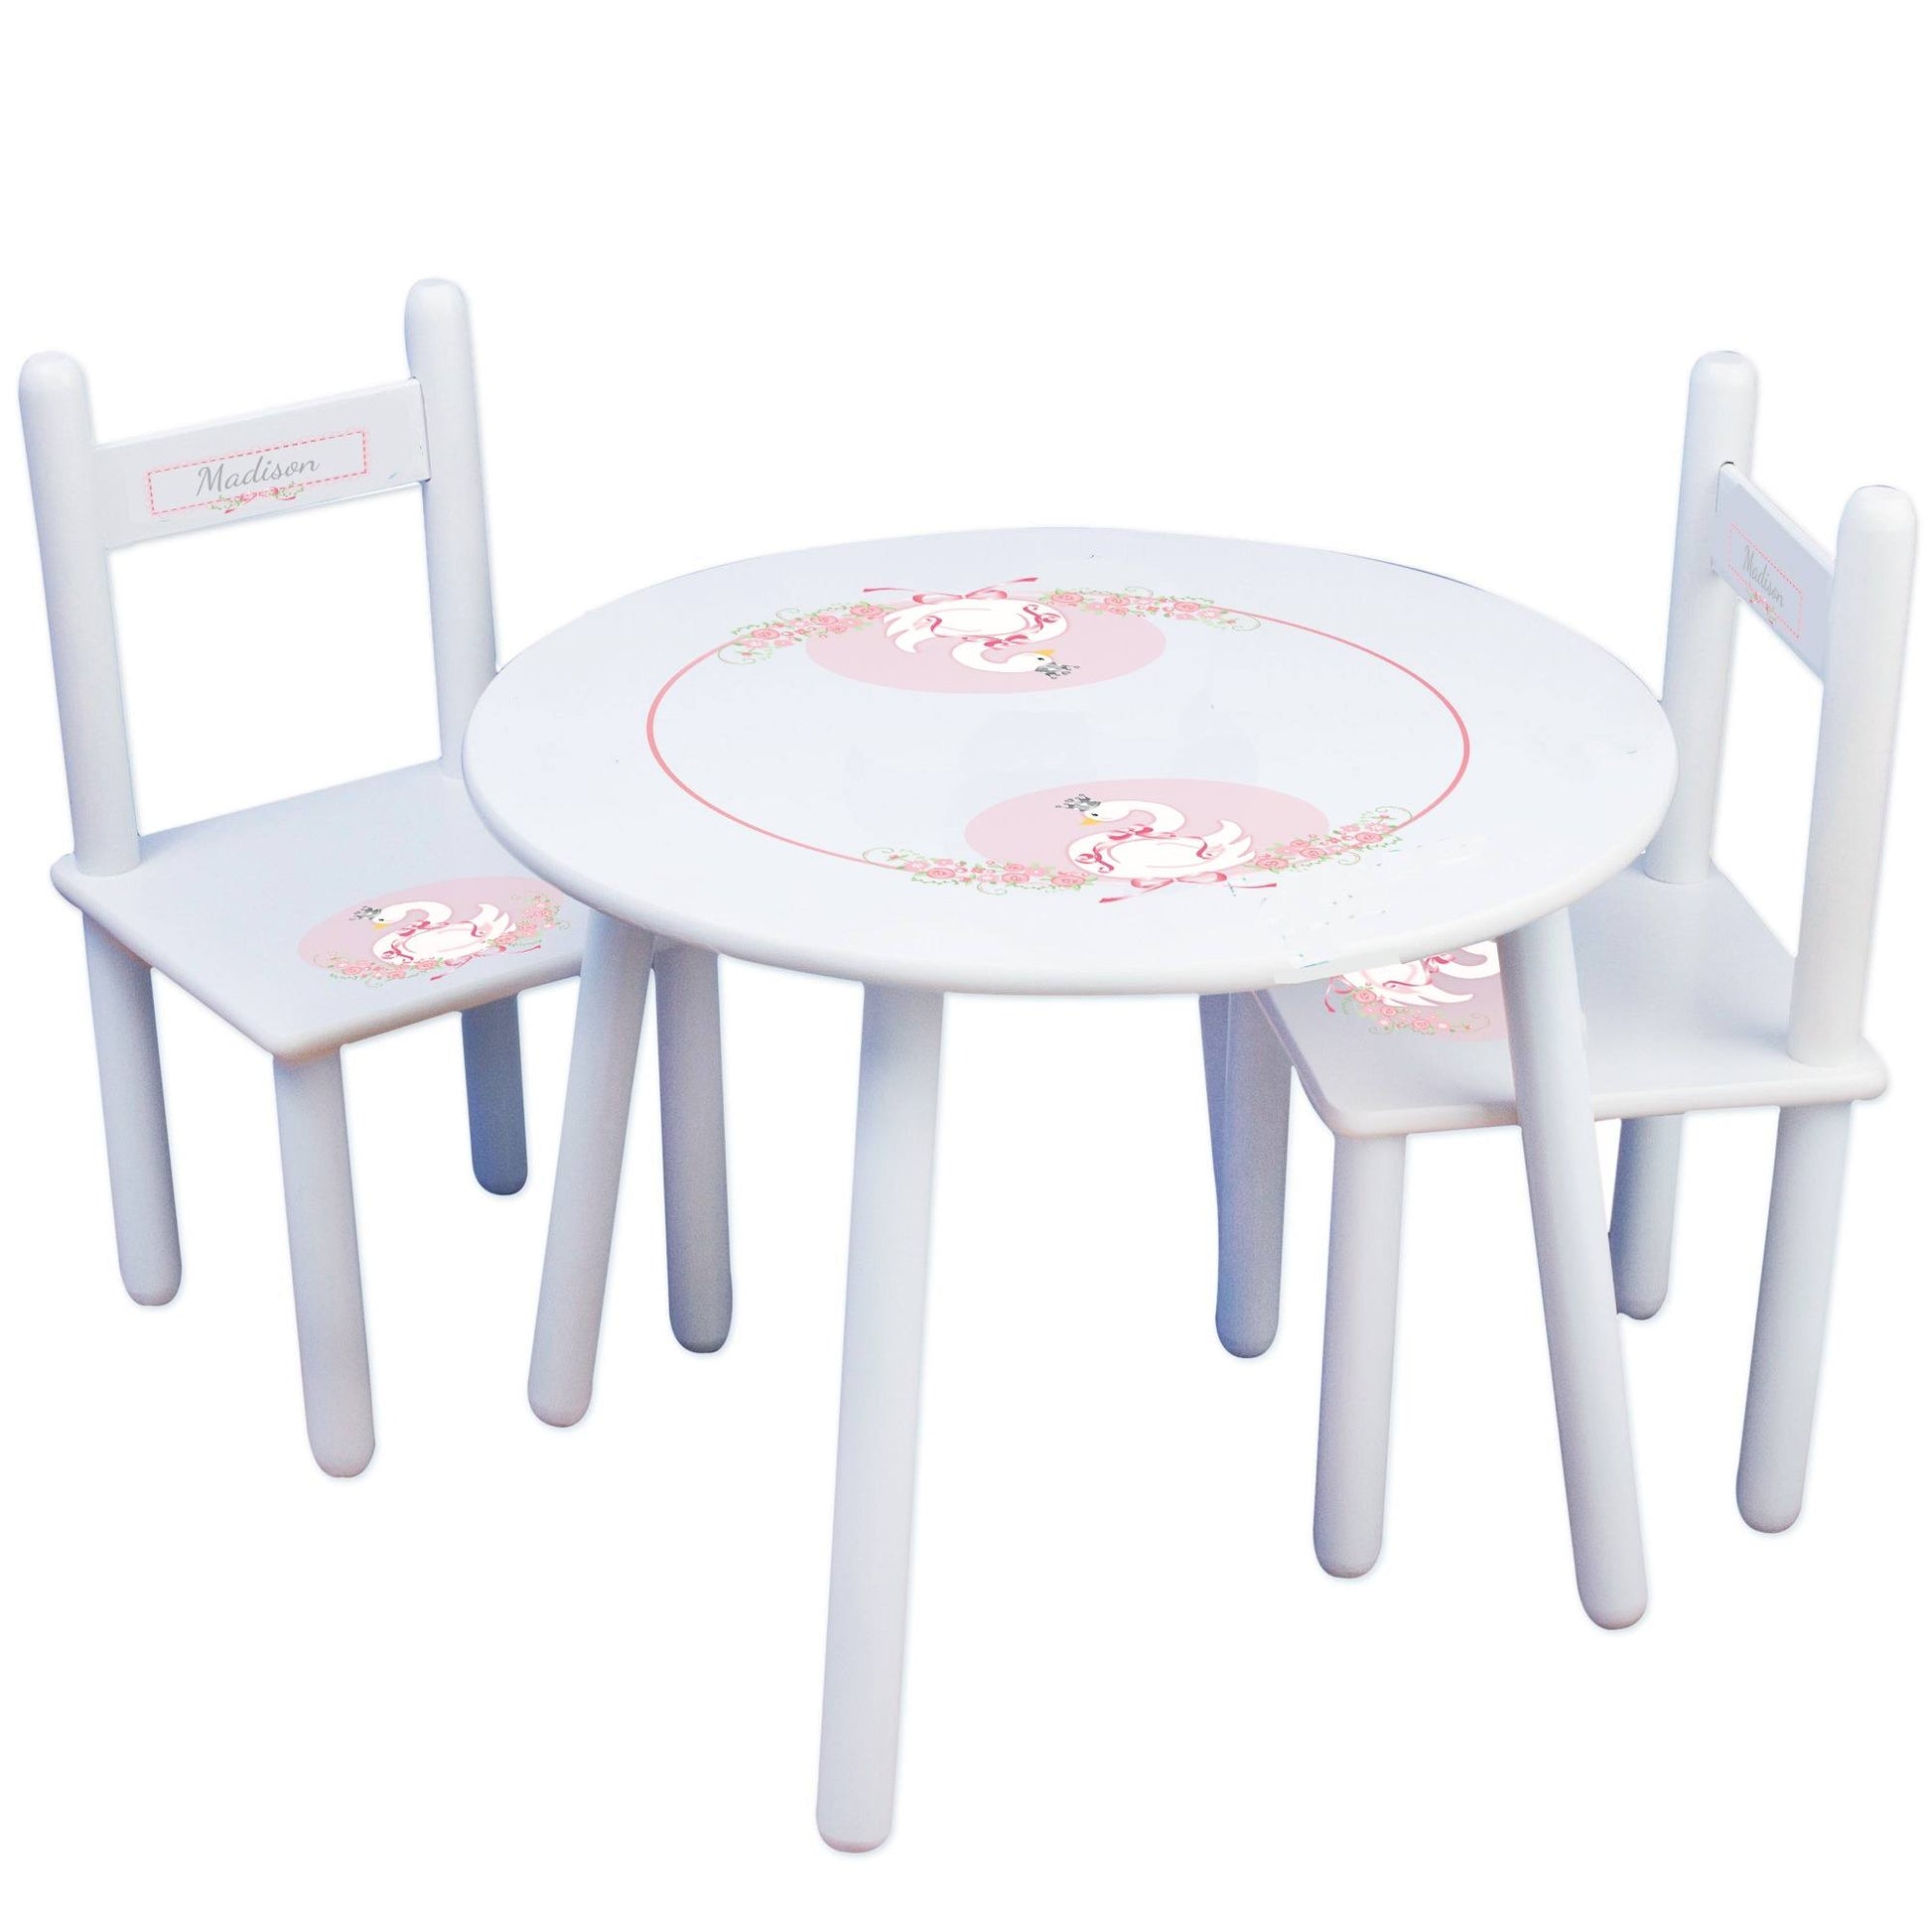 Personalized Table and Chairs with Swan design